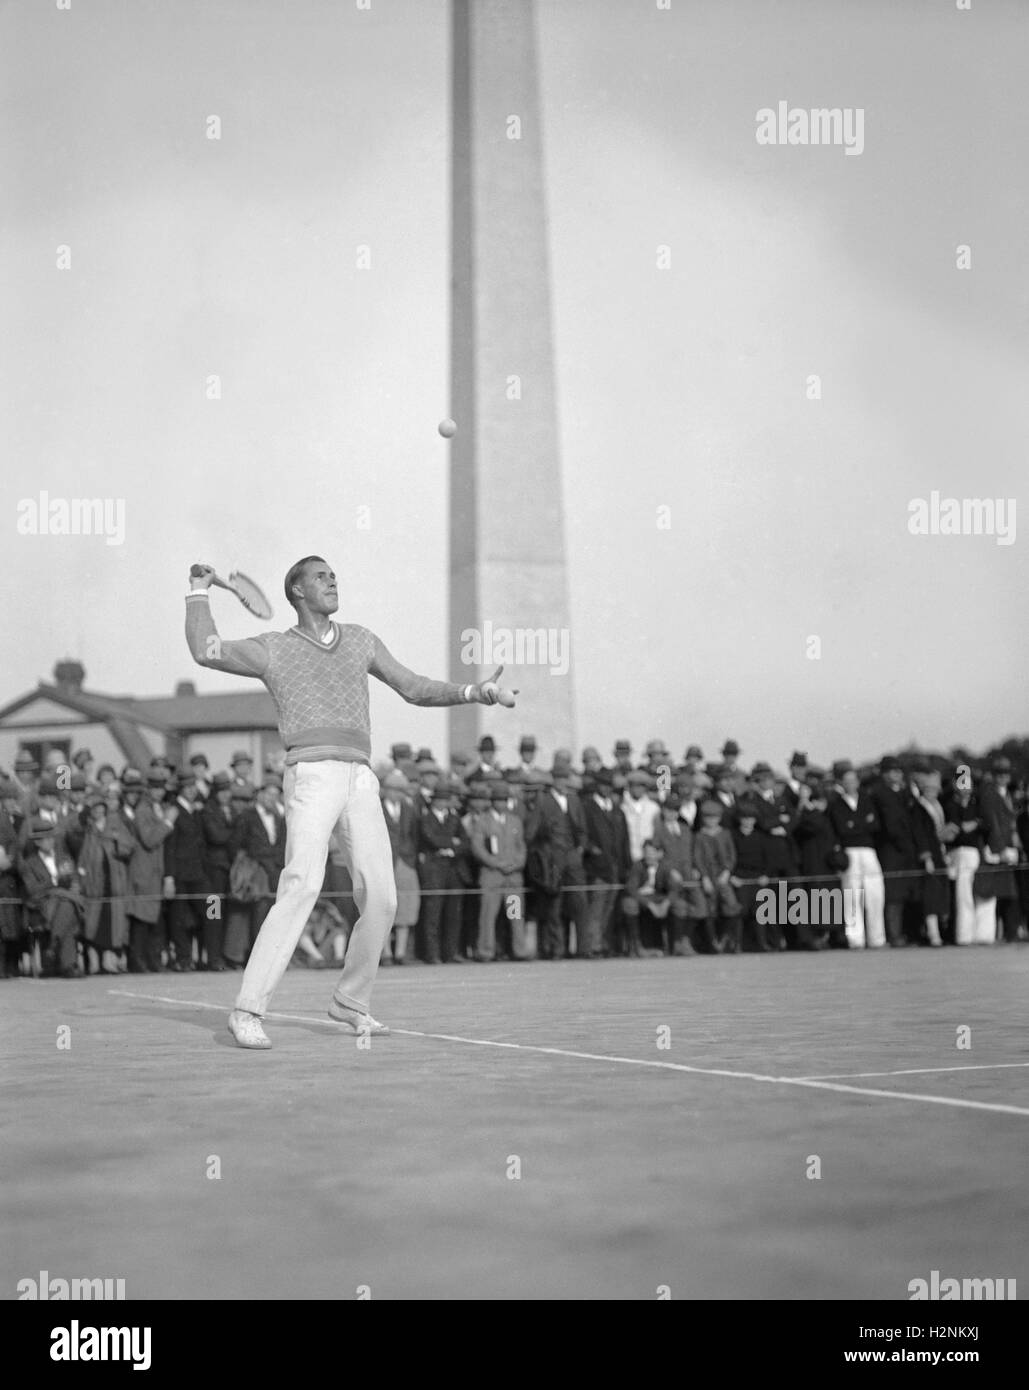 Tennis Player Bill Tilden in Action, Washington DC, USA, National Photo Company, May 1925 Stock Photo